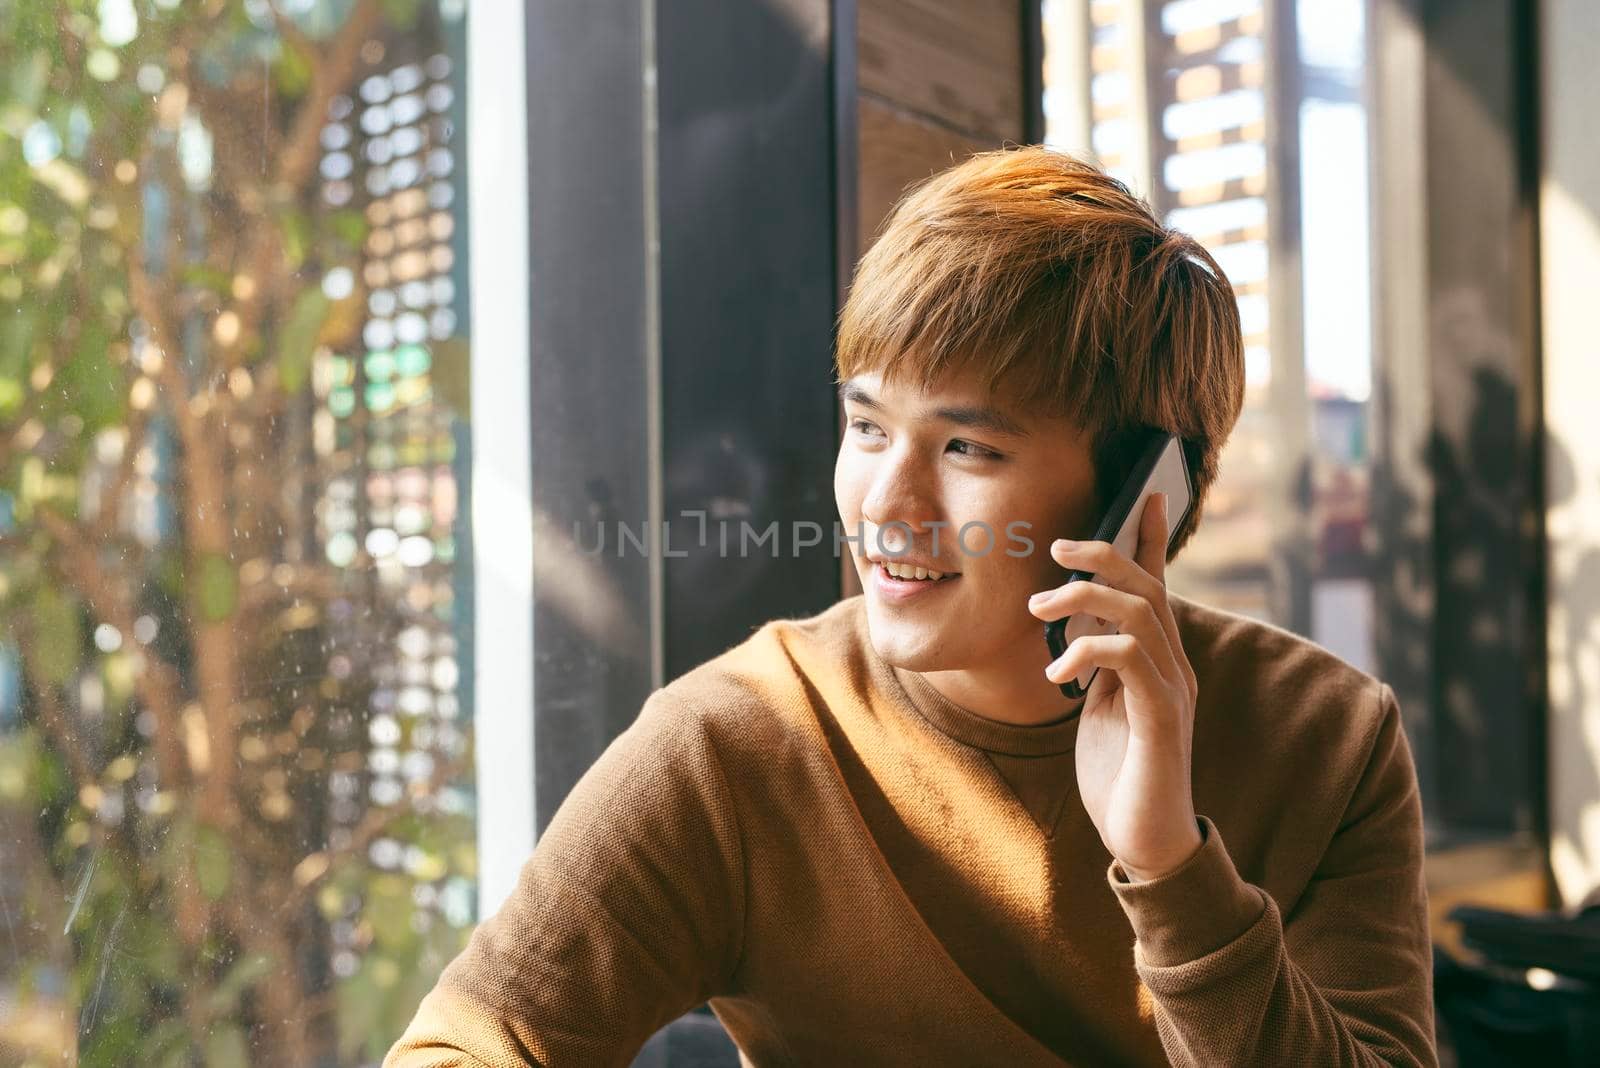 Closeup portrait of smiling young Asian man talking on mobile phone and sitting at empty table with blurred cafe interior in background